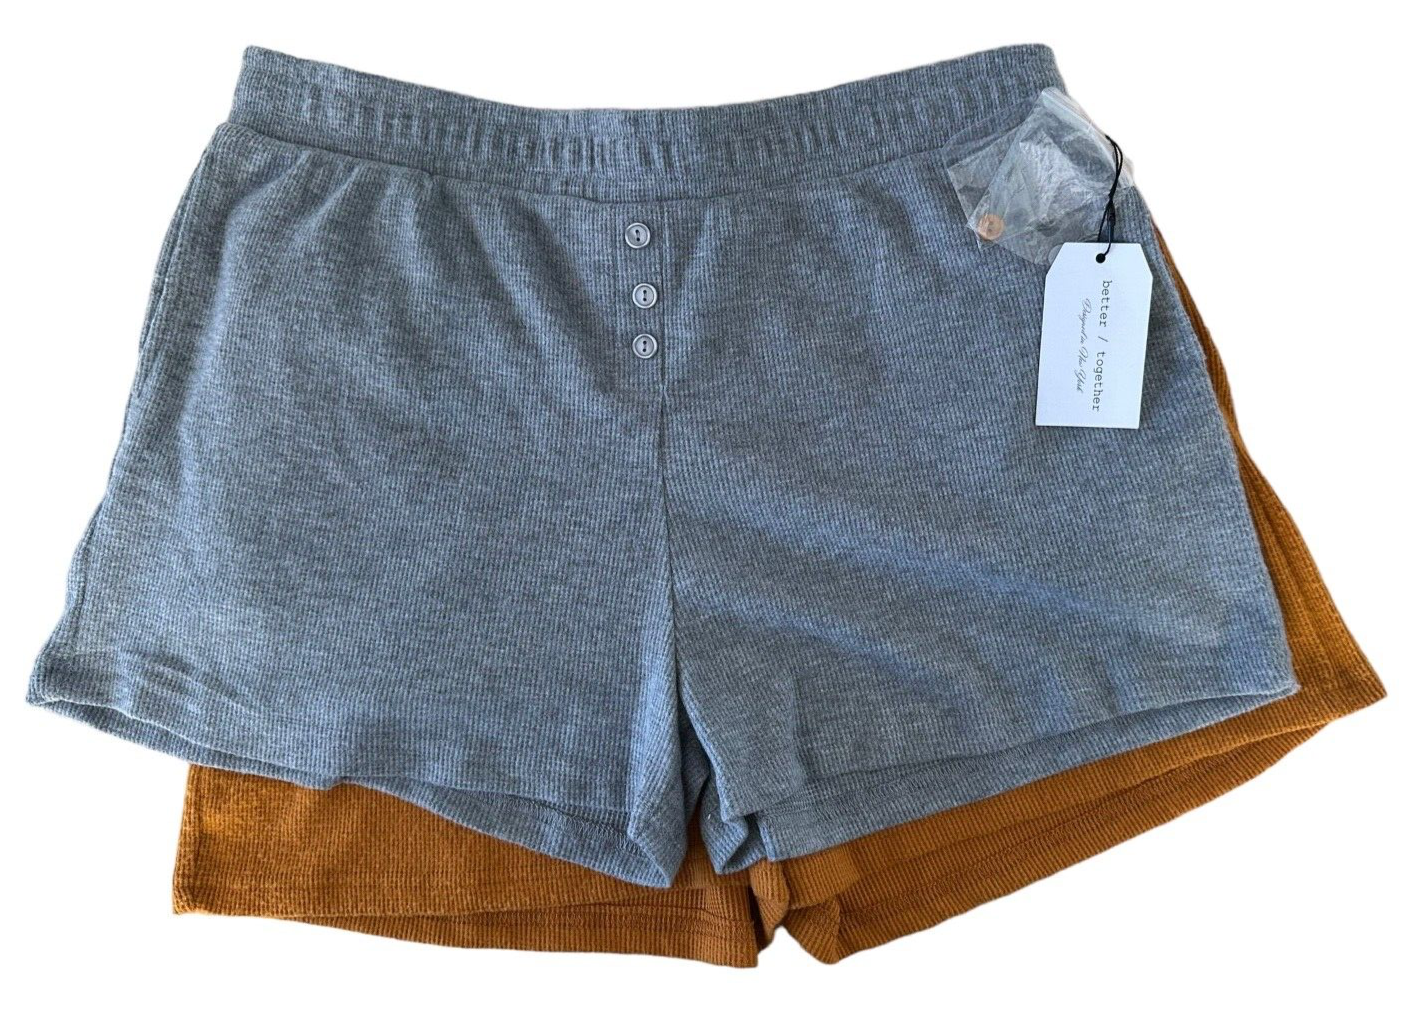 Primary image for Better Together Women's 2 Pack Knit Lounge Shorts Size XL Gray & Burnt Orange